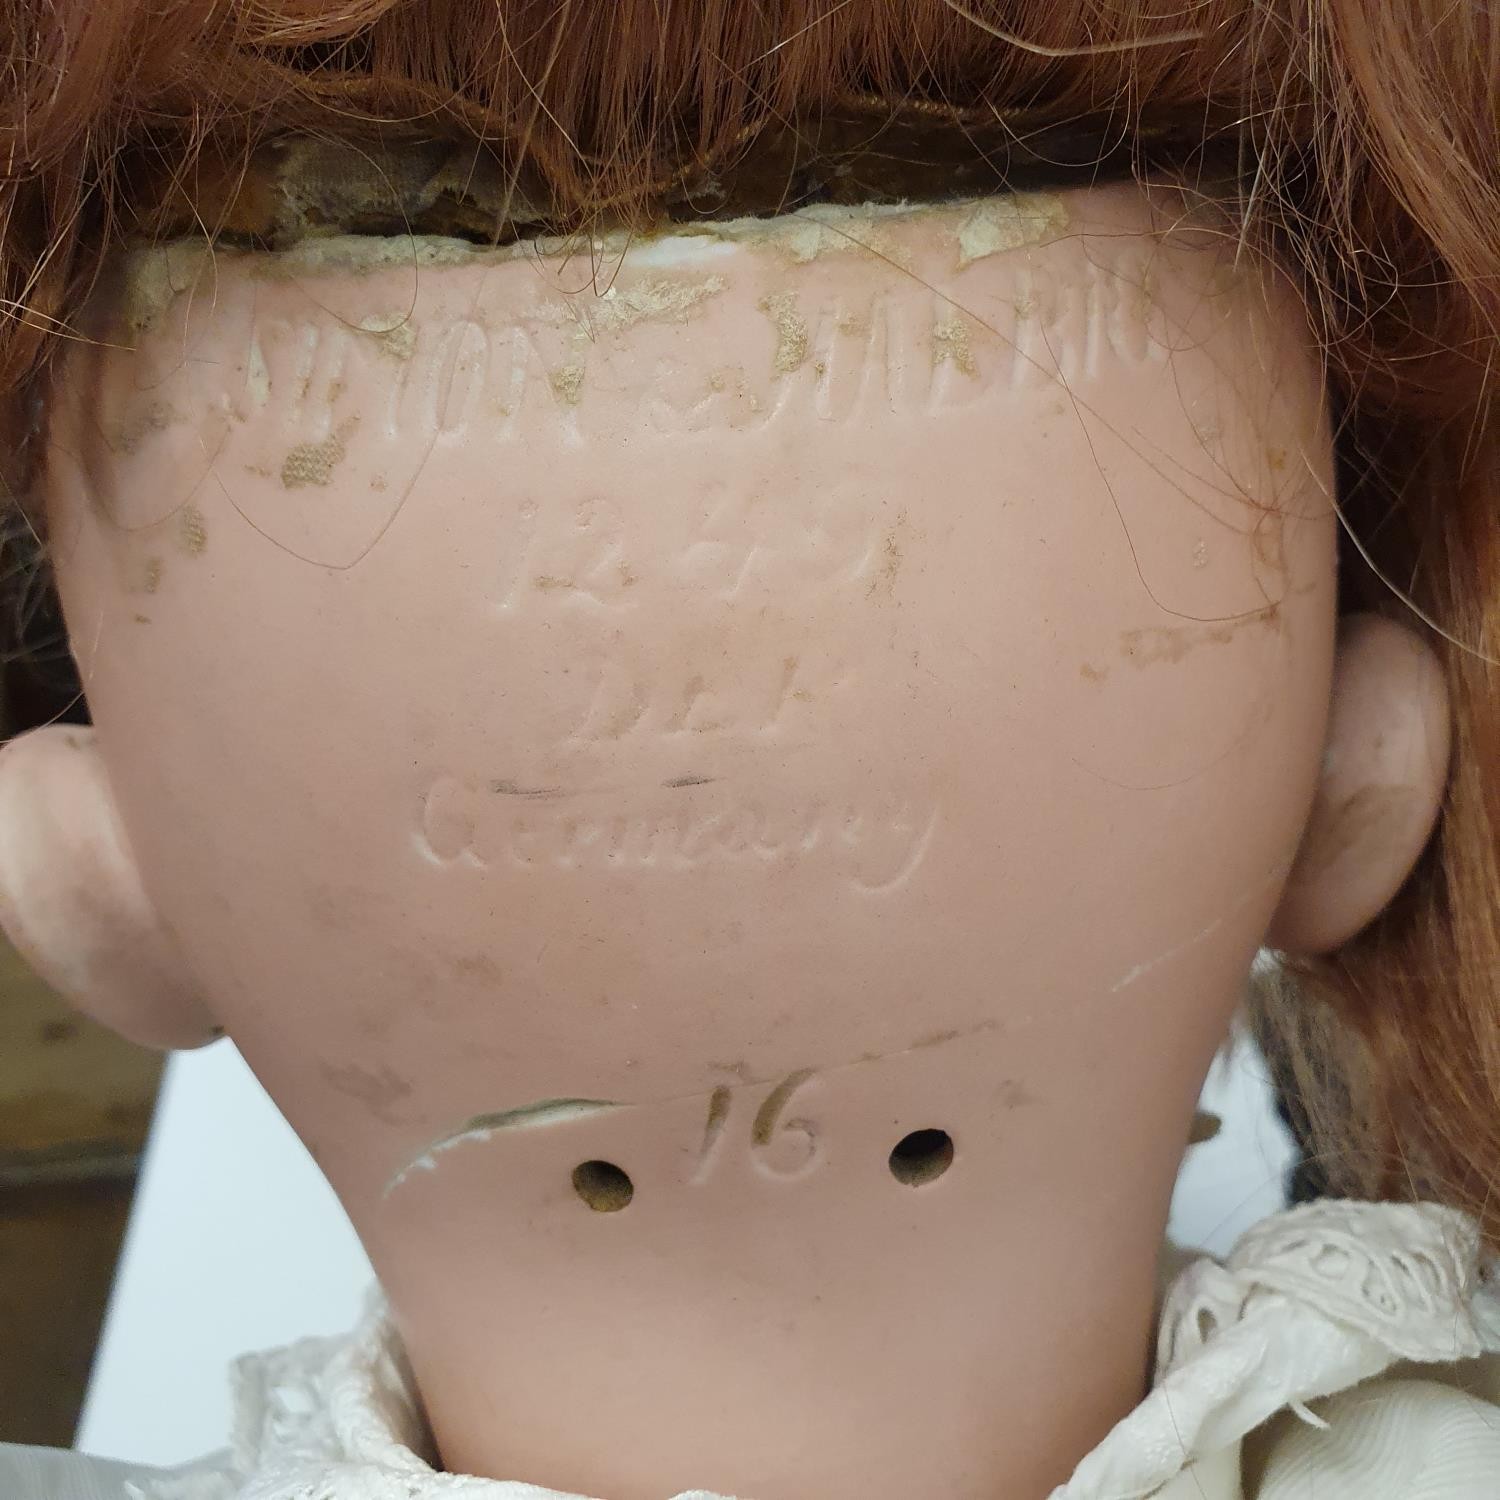 A Simon & Halbig German bisque headed doll, No 1299, with a jointed composite and wood body, 83 cm - Image 5 of 7